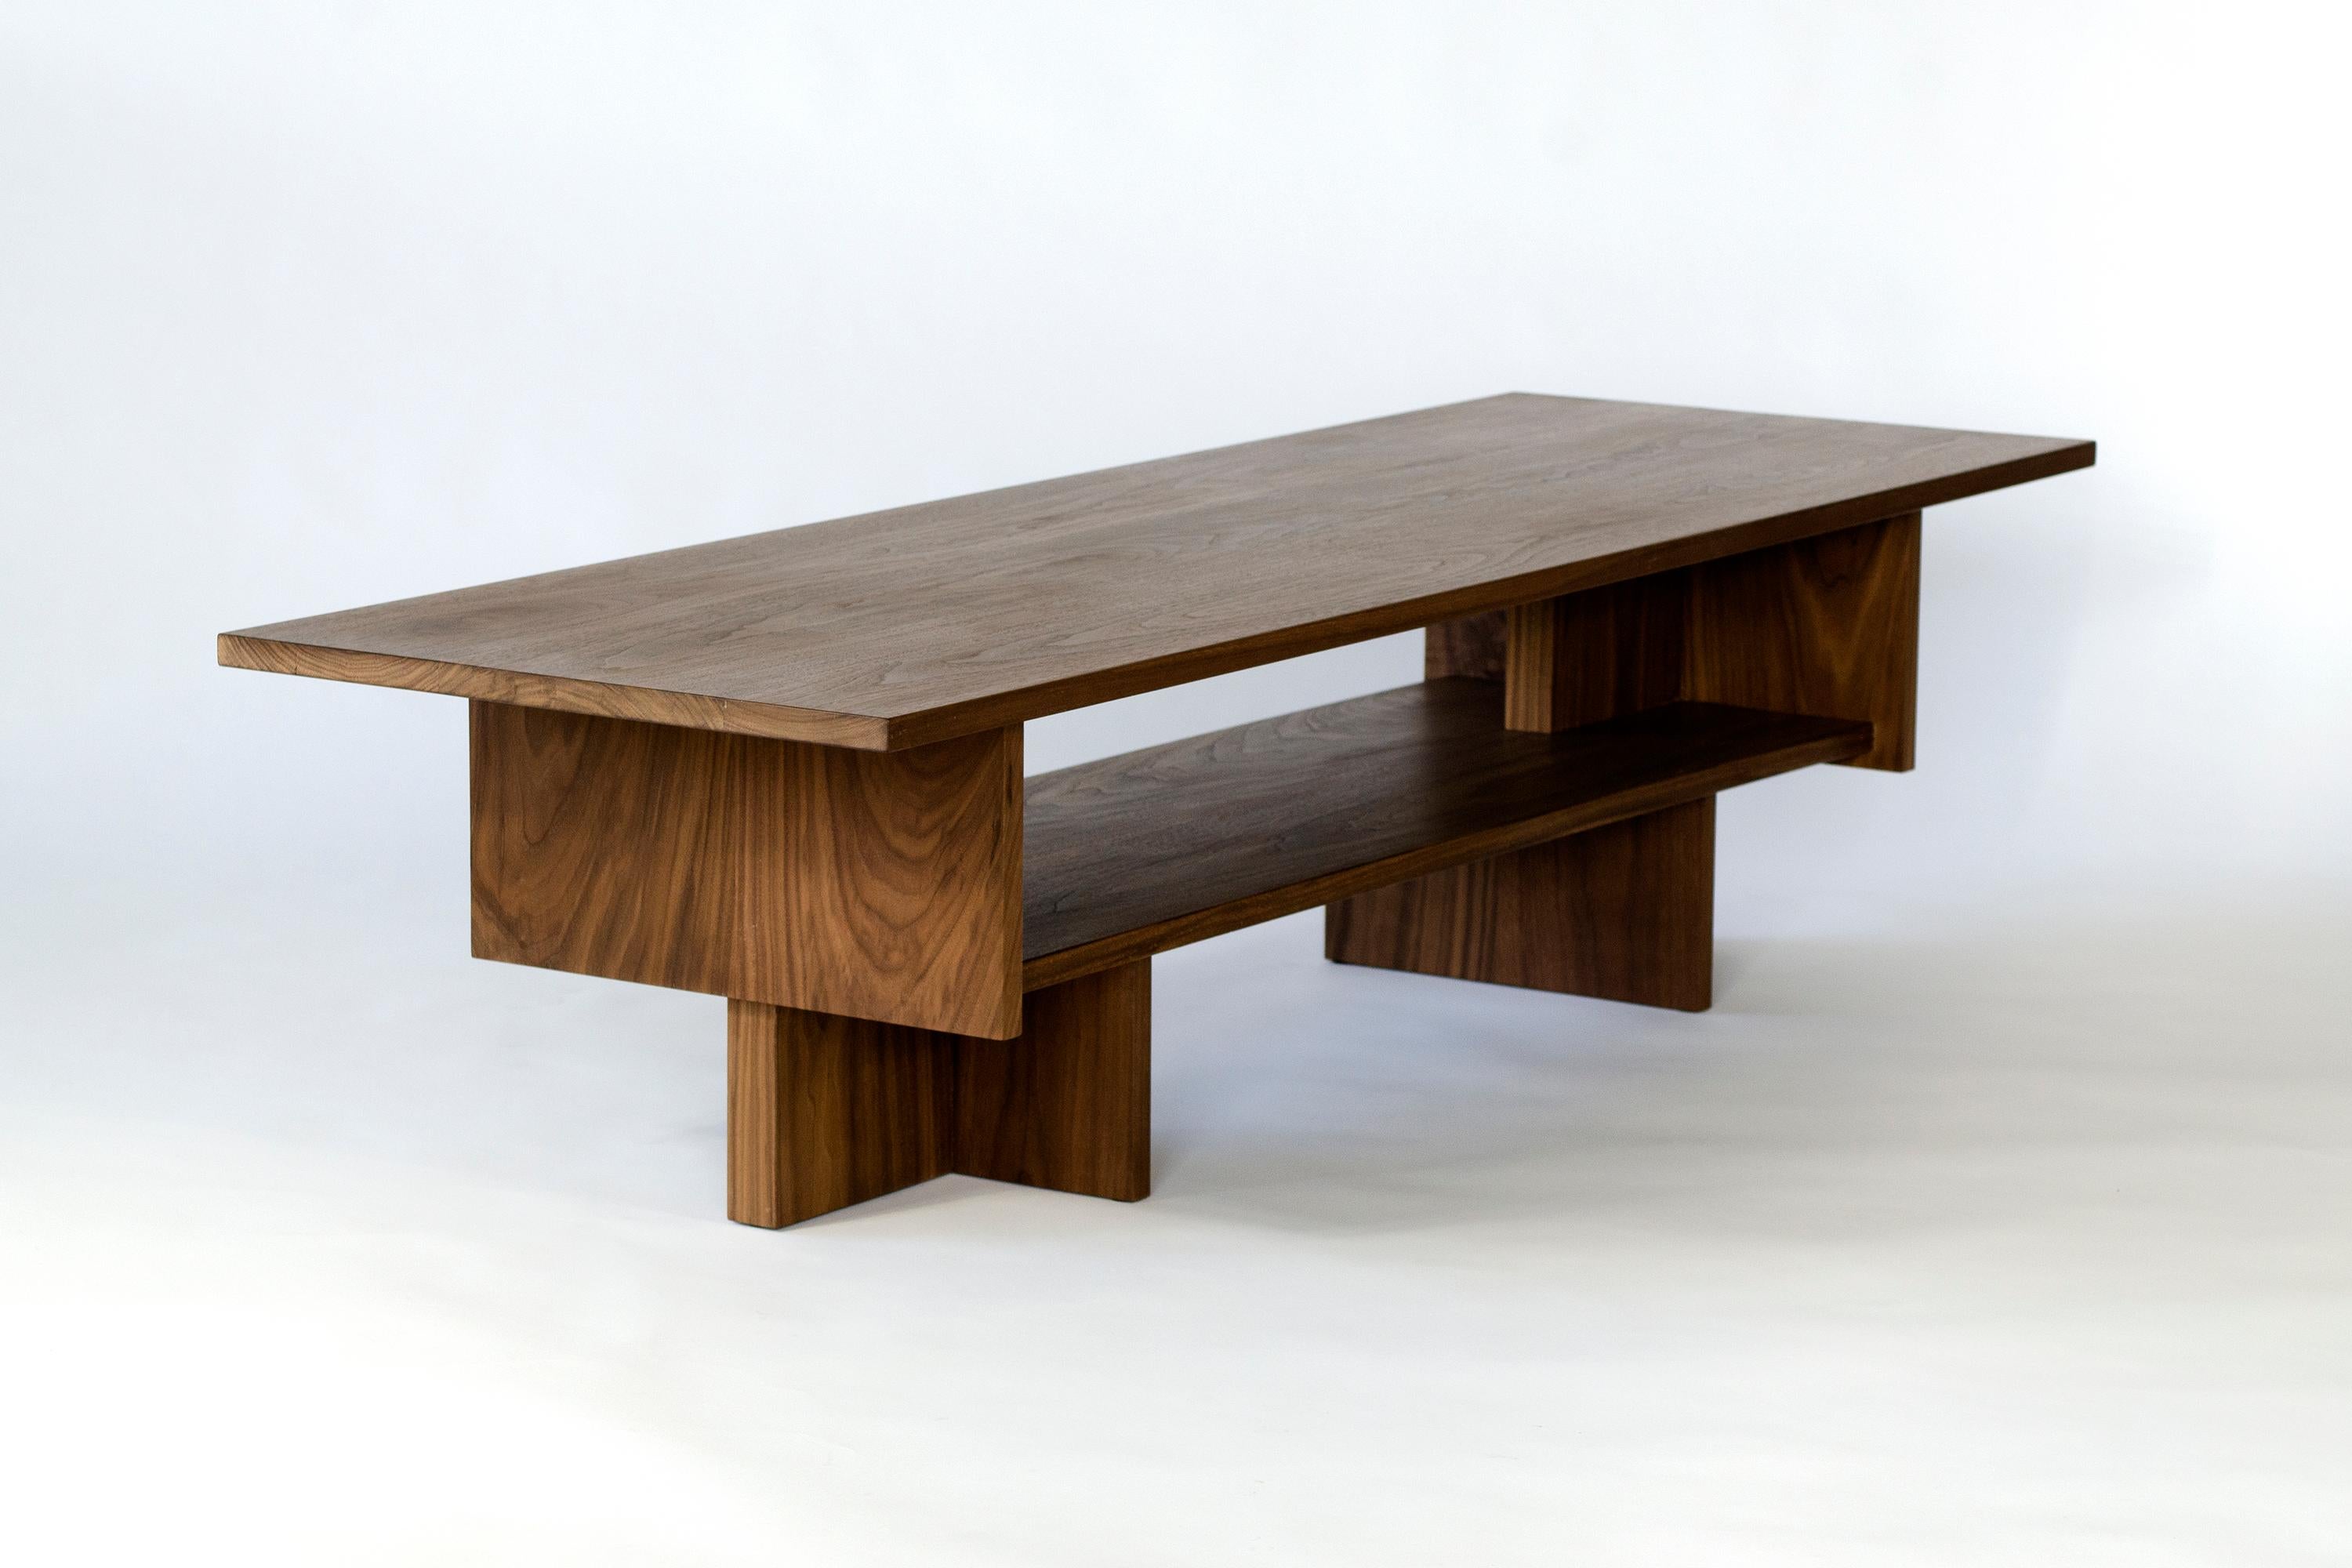 Ballast table, named for the two hefty uprights which form its structure, is a generously sized coffee table. Careful attention to proportion and the arrangement of parts give the Ballast table it's characteristic form with nooks for storing books